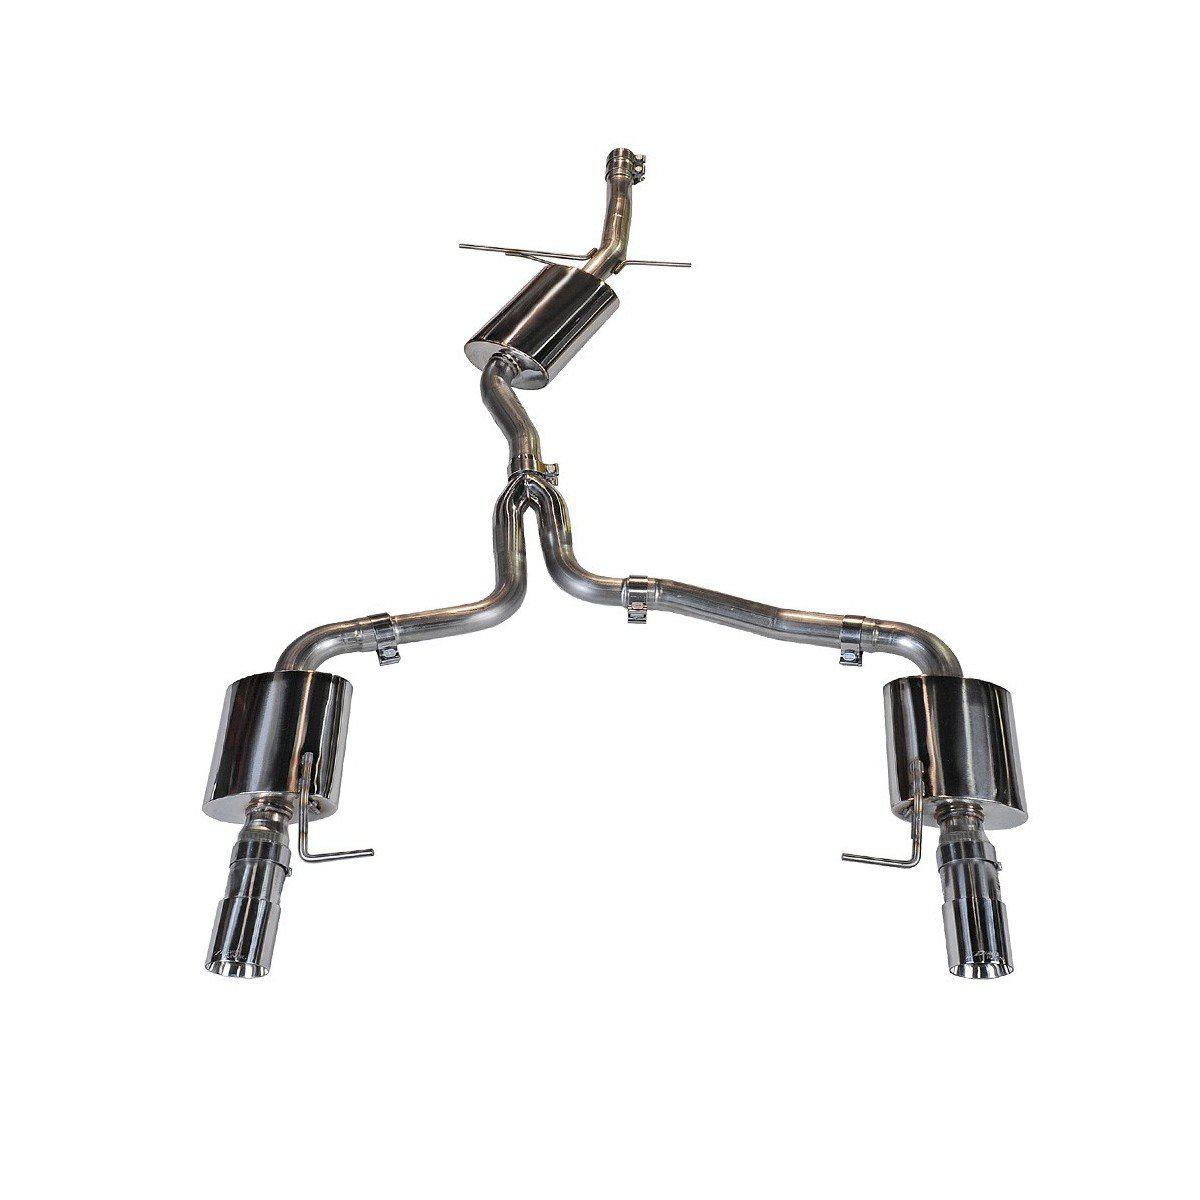 Awe Tuning B8.5 Audi A5 2.0T Touring Edition Cat-Back Exhaust System-A Little Tuning Co